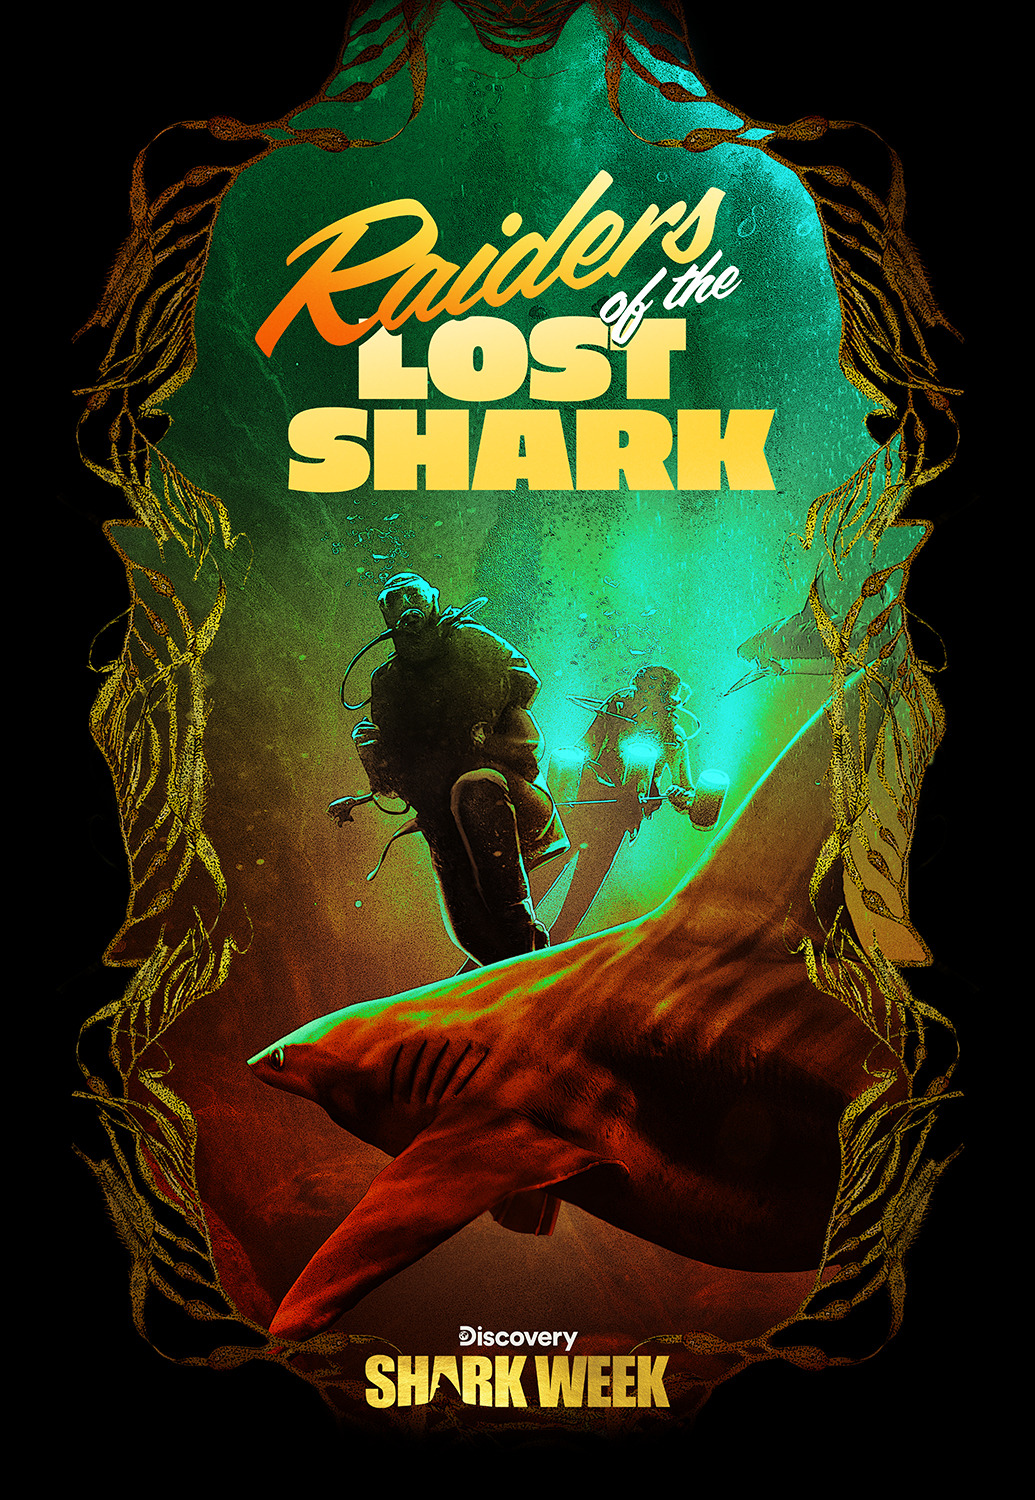 Extra Large TV Poster Image for Raiders of the Lost Shark 